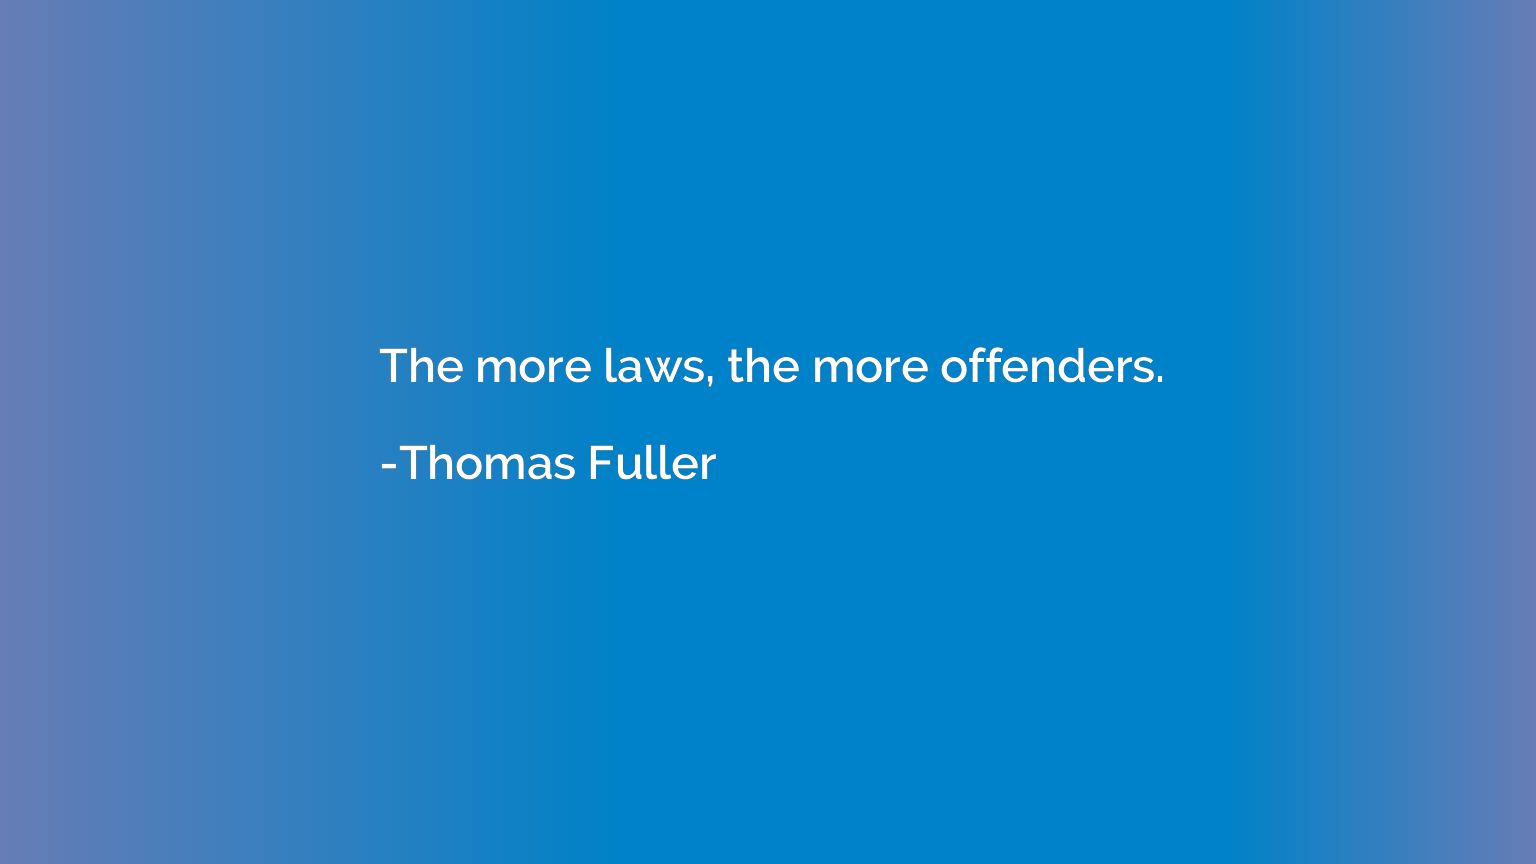 The more laws, the more offenders.